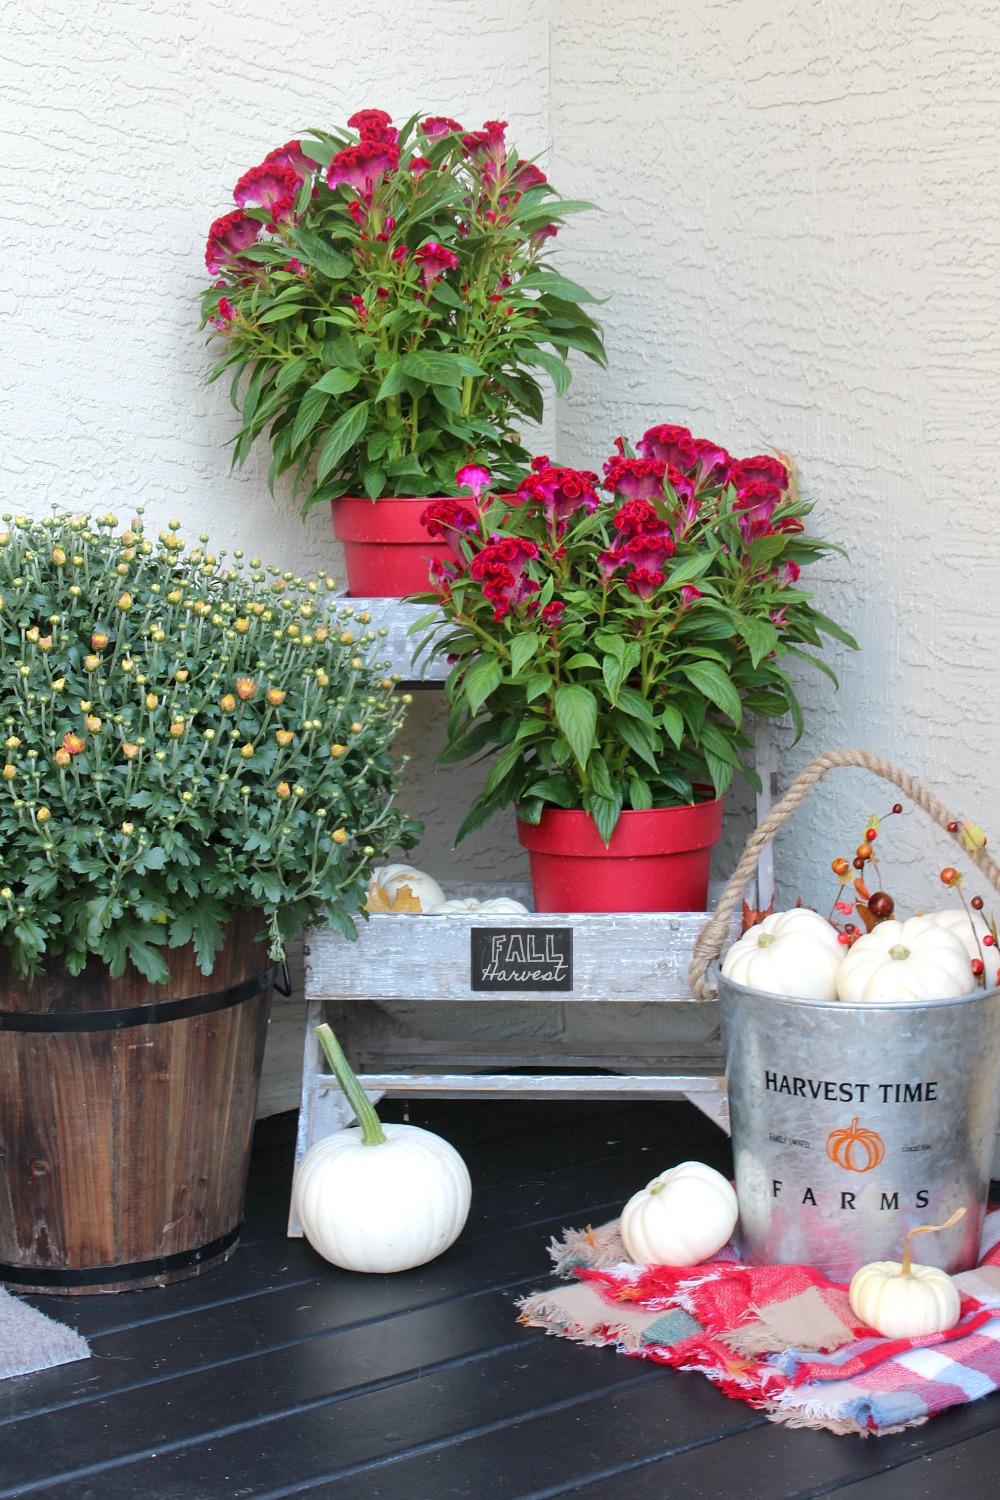 Colorful fall front porch decorating ideas. Rustic farmhouse style.